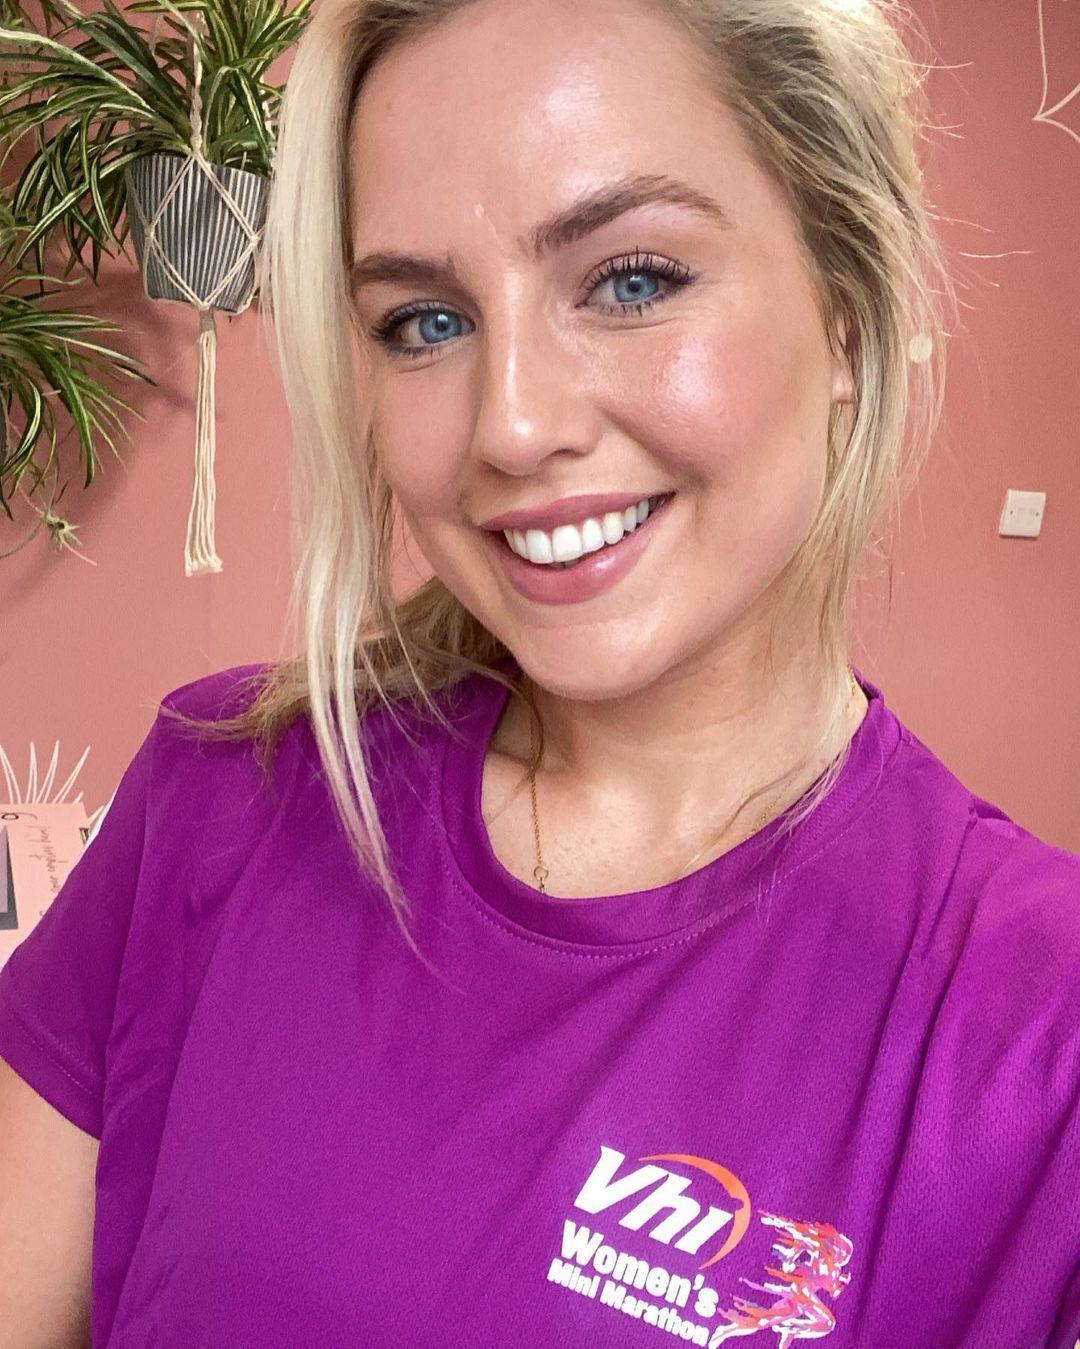 
 Well yesterday was exciting! (thanks for all of the messages❤️)
I am so thrilled to have been asked to be an ambassador for this year’s Vhi Women’s Mini Marathon @vhiwmm 🏃🏼‍♀️
Loads to celebrate in its 40th year alongside the lovely ladies @rozannapurcell @belle_azzure @healthyfitbella_ 🎈 

Running is something that I got into over the last 2 years so I’m really excited to get training - it can be so hard to juggle it all but at least with the goal of race day it’ll help with my consistency - I’m hoping lots of you will join me too &amp; we can get ready together! 😍

Entries are open now - link in bio - so make sure to join &amp; ill see you there 👏🏼
AD

Who’s signing up?! 
 #vhiwmm 
 